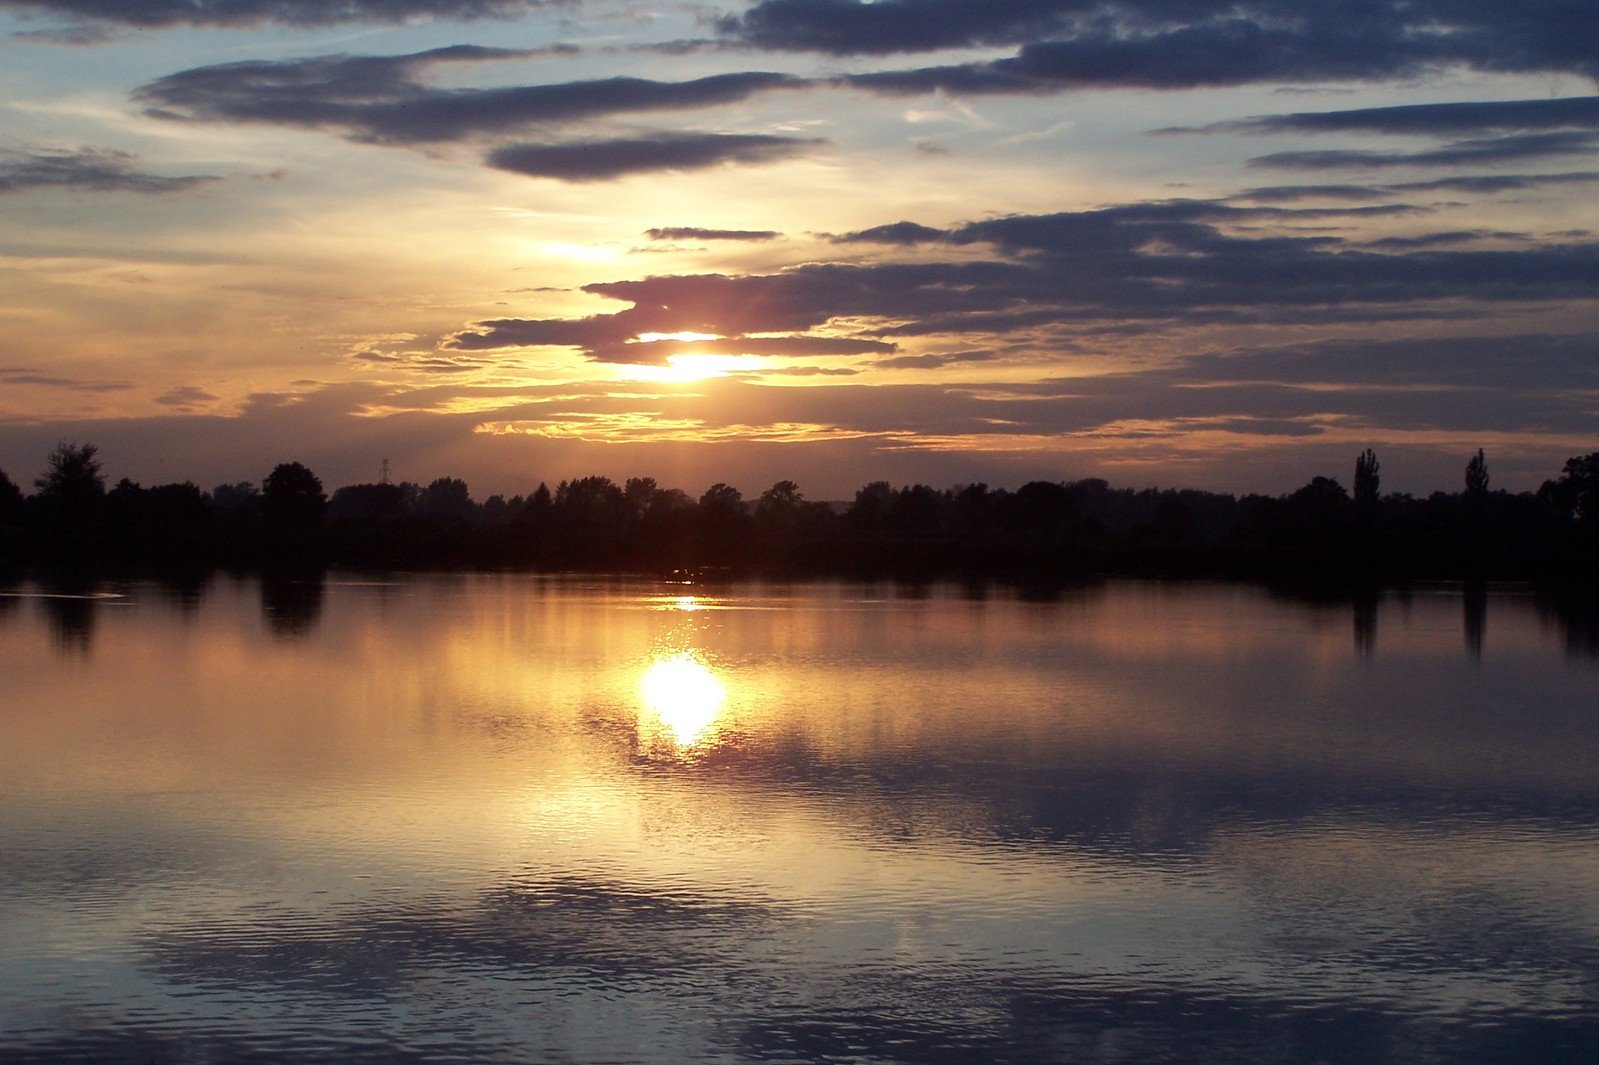 the sun is reflected in the still water of the river